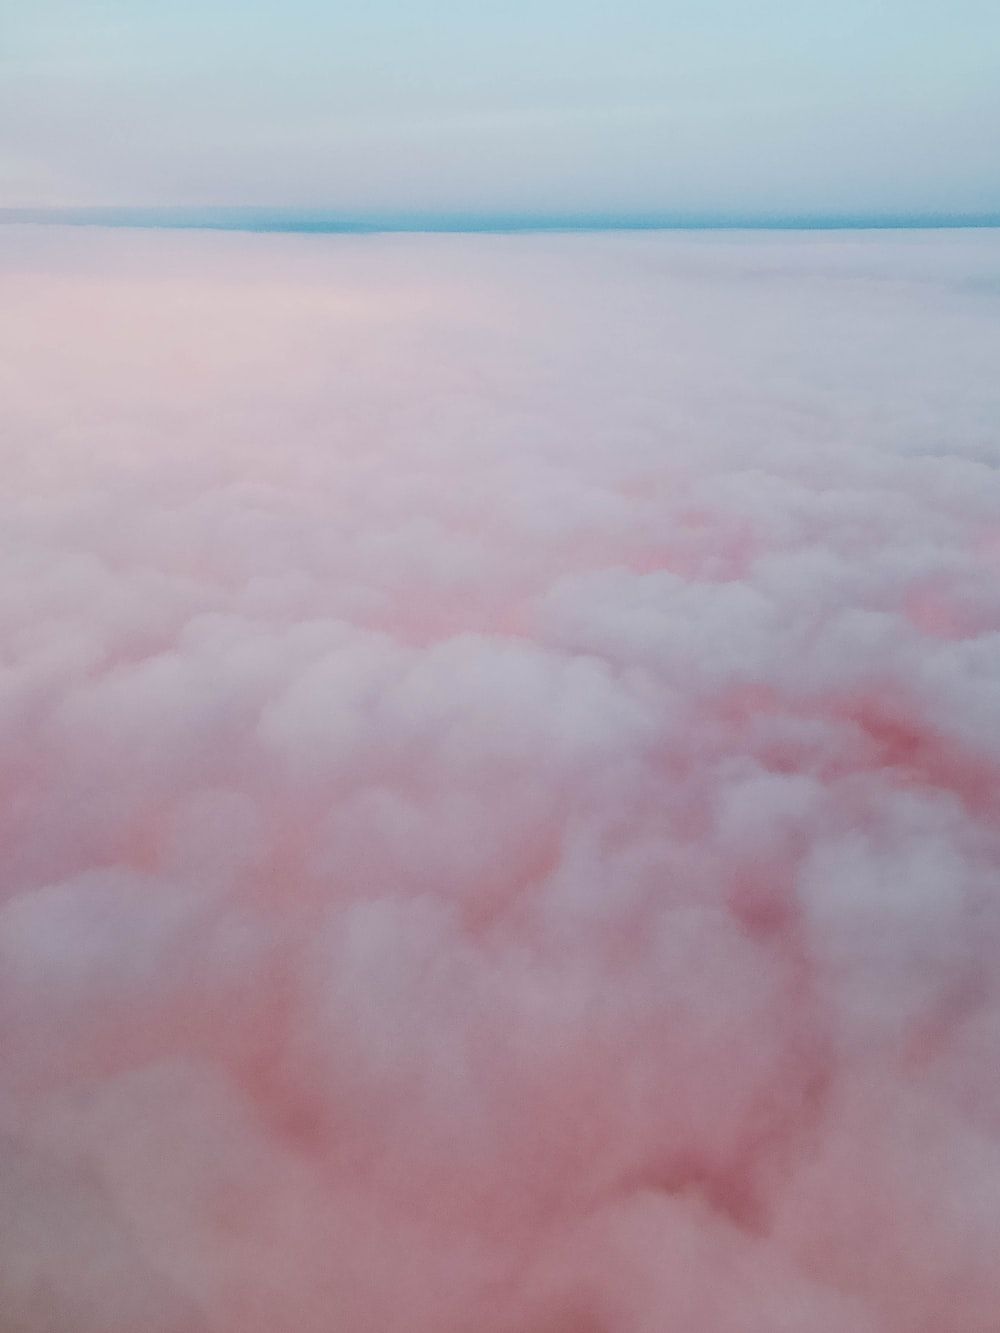 Cotton Candy Cloud Picture. Download Free Image